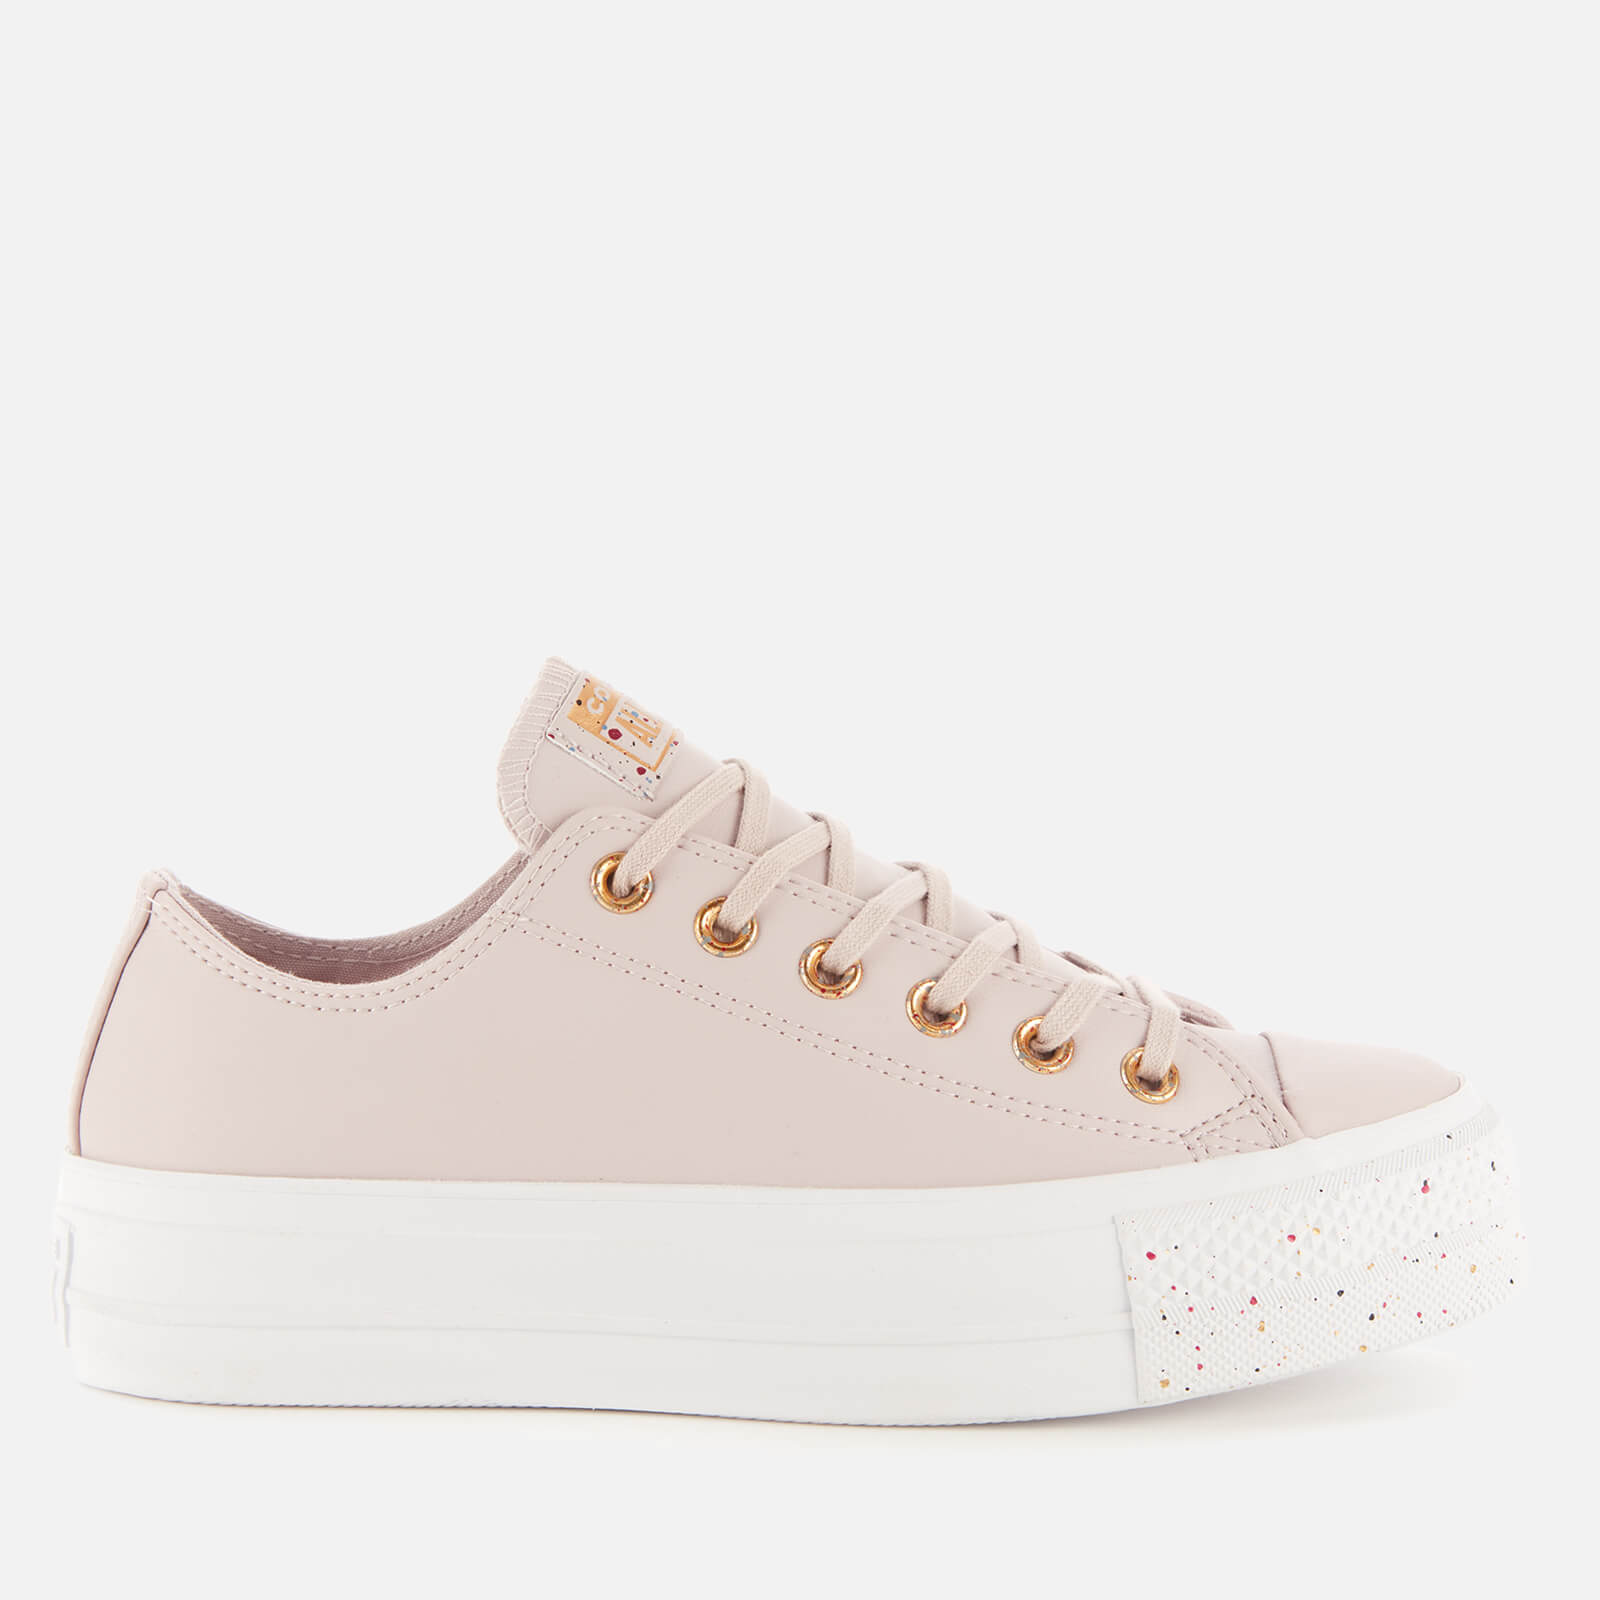 rose gold converse shoes